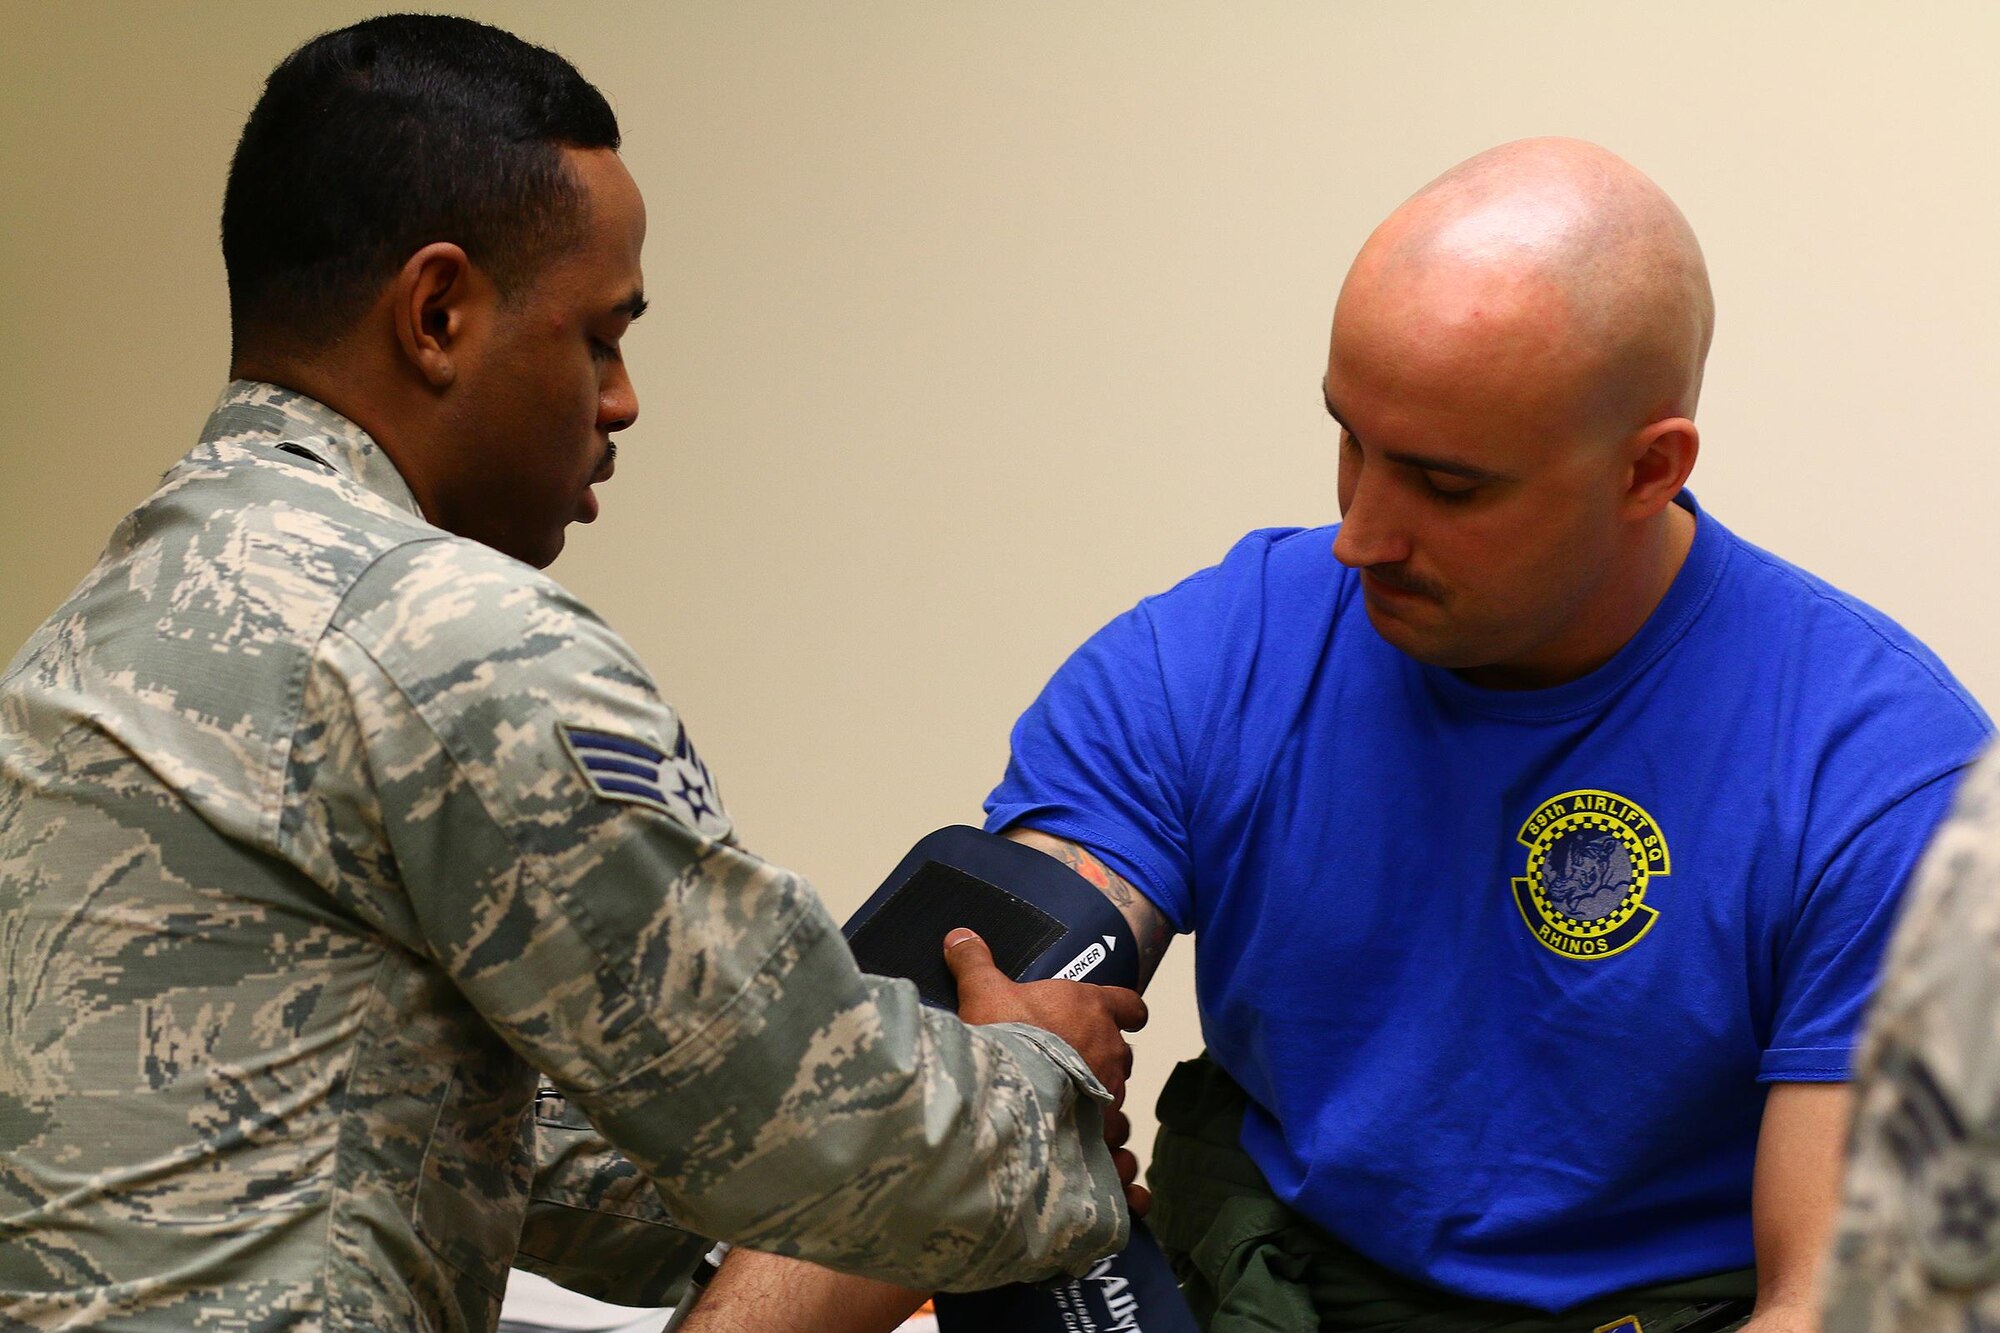 Senior Airman Dalexander Massie, 445th Aerospace Medicine Squadron medical technician, checks the vitals of Capt. Nate Kirstein, 89th Airlift Squadron C-17 Globemaster III pilot, as part of his annual physical health assessment March 5, 2016.